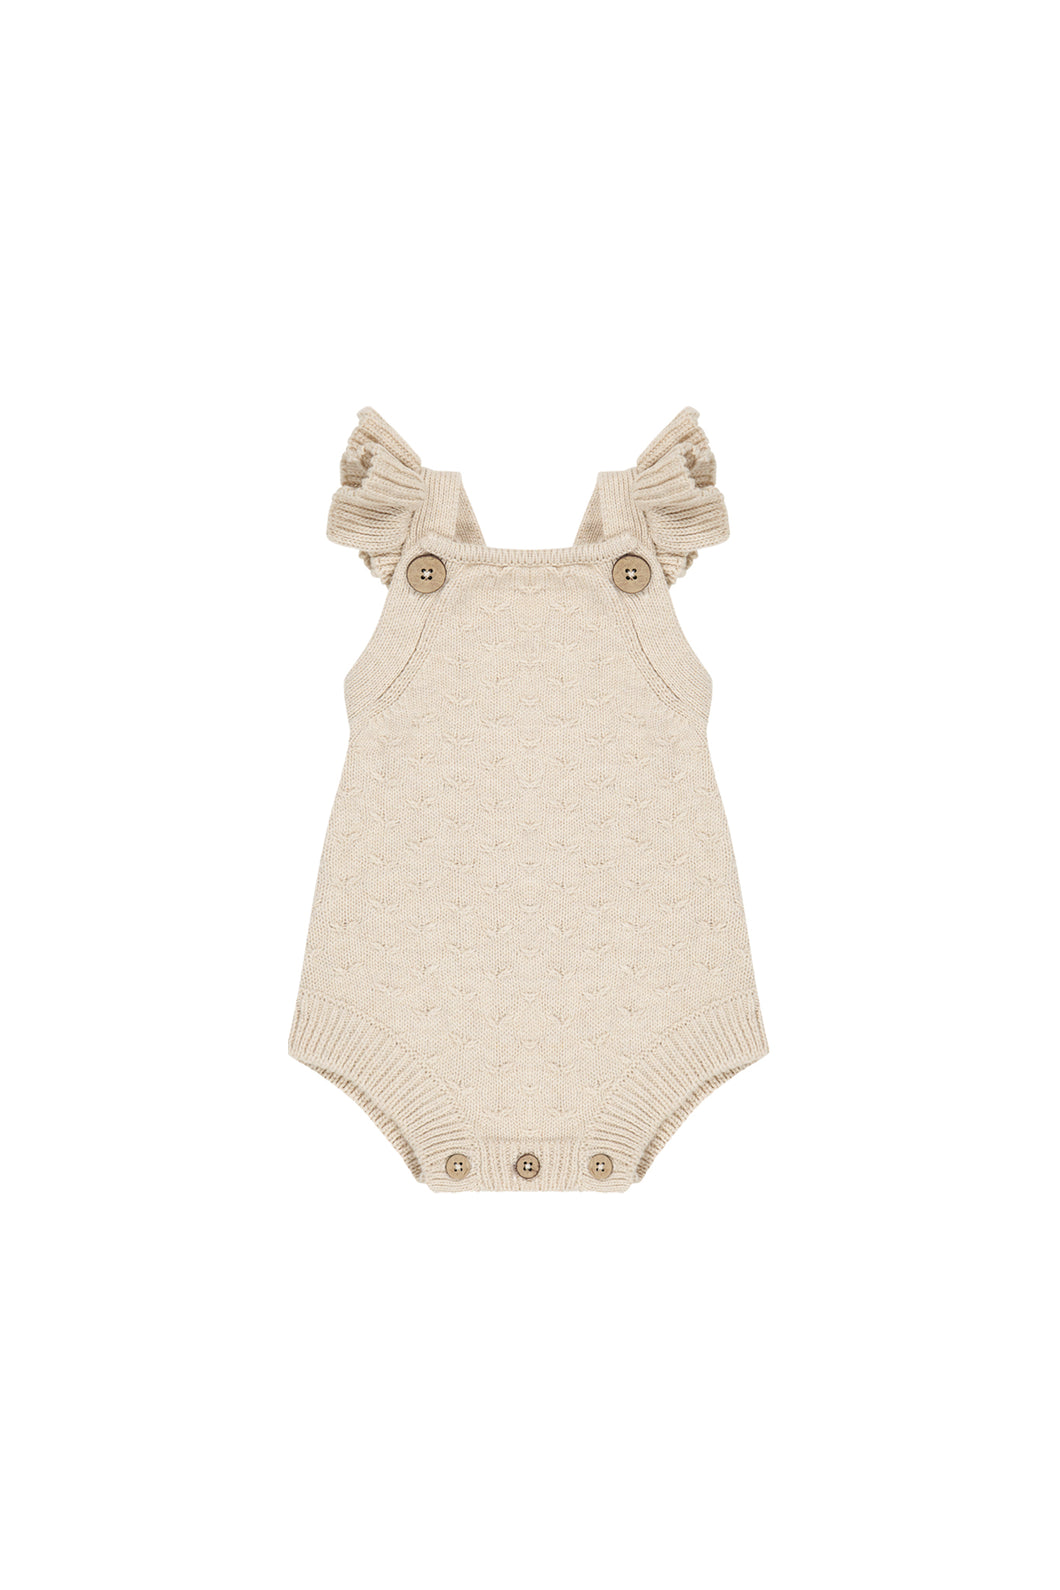 Mia Knitted Romper - Oatmeal Marle SIZE 2YR